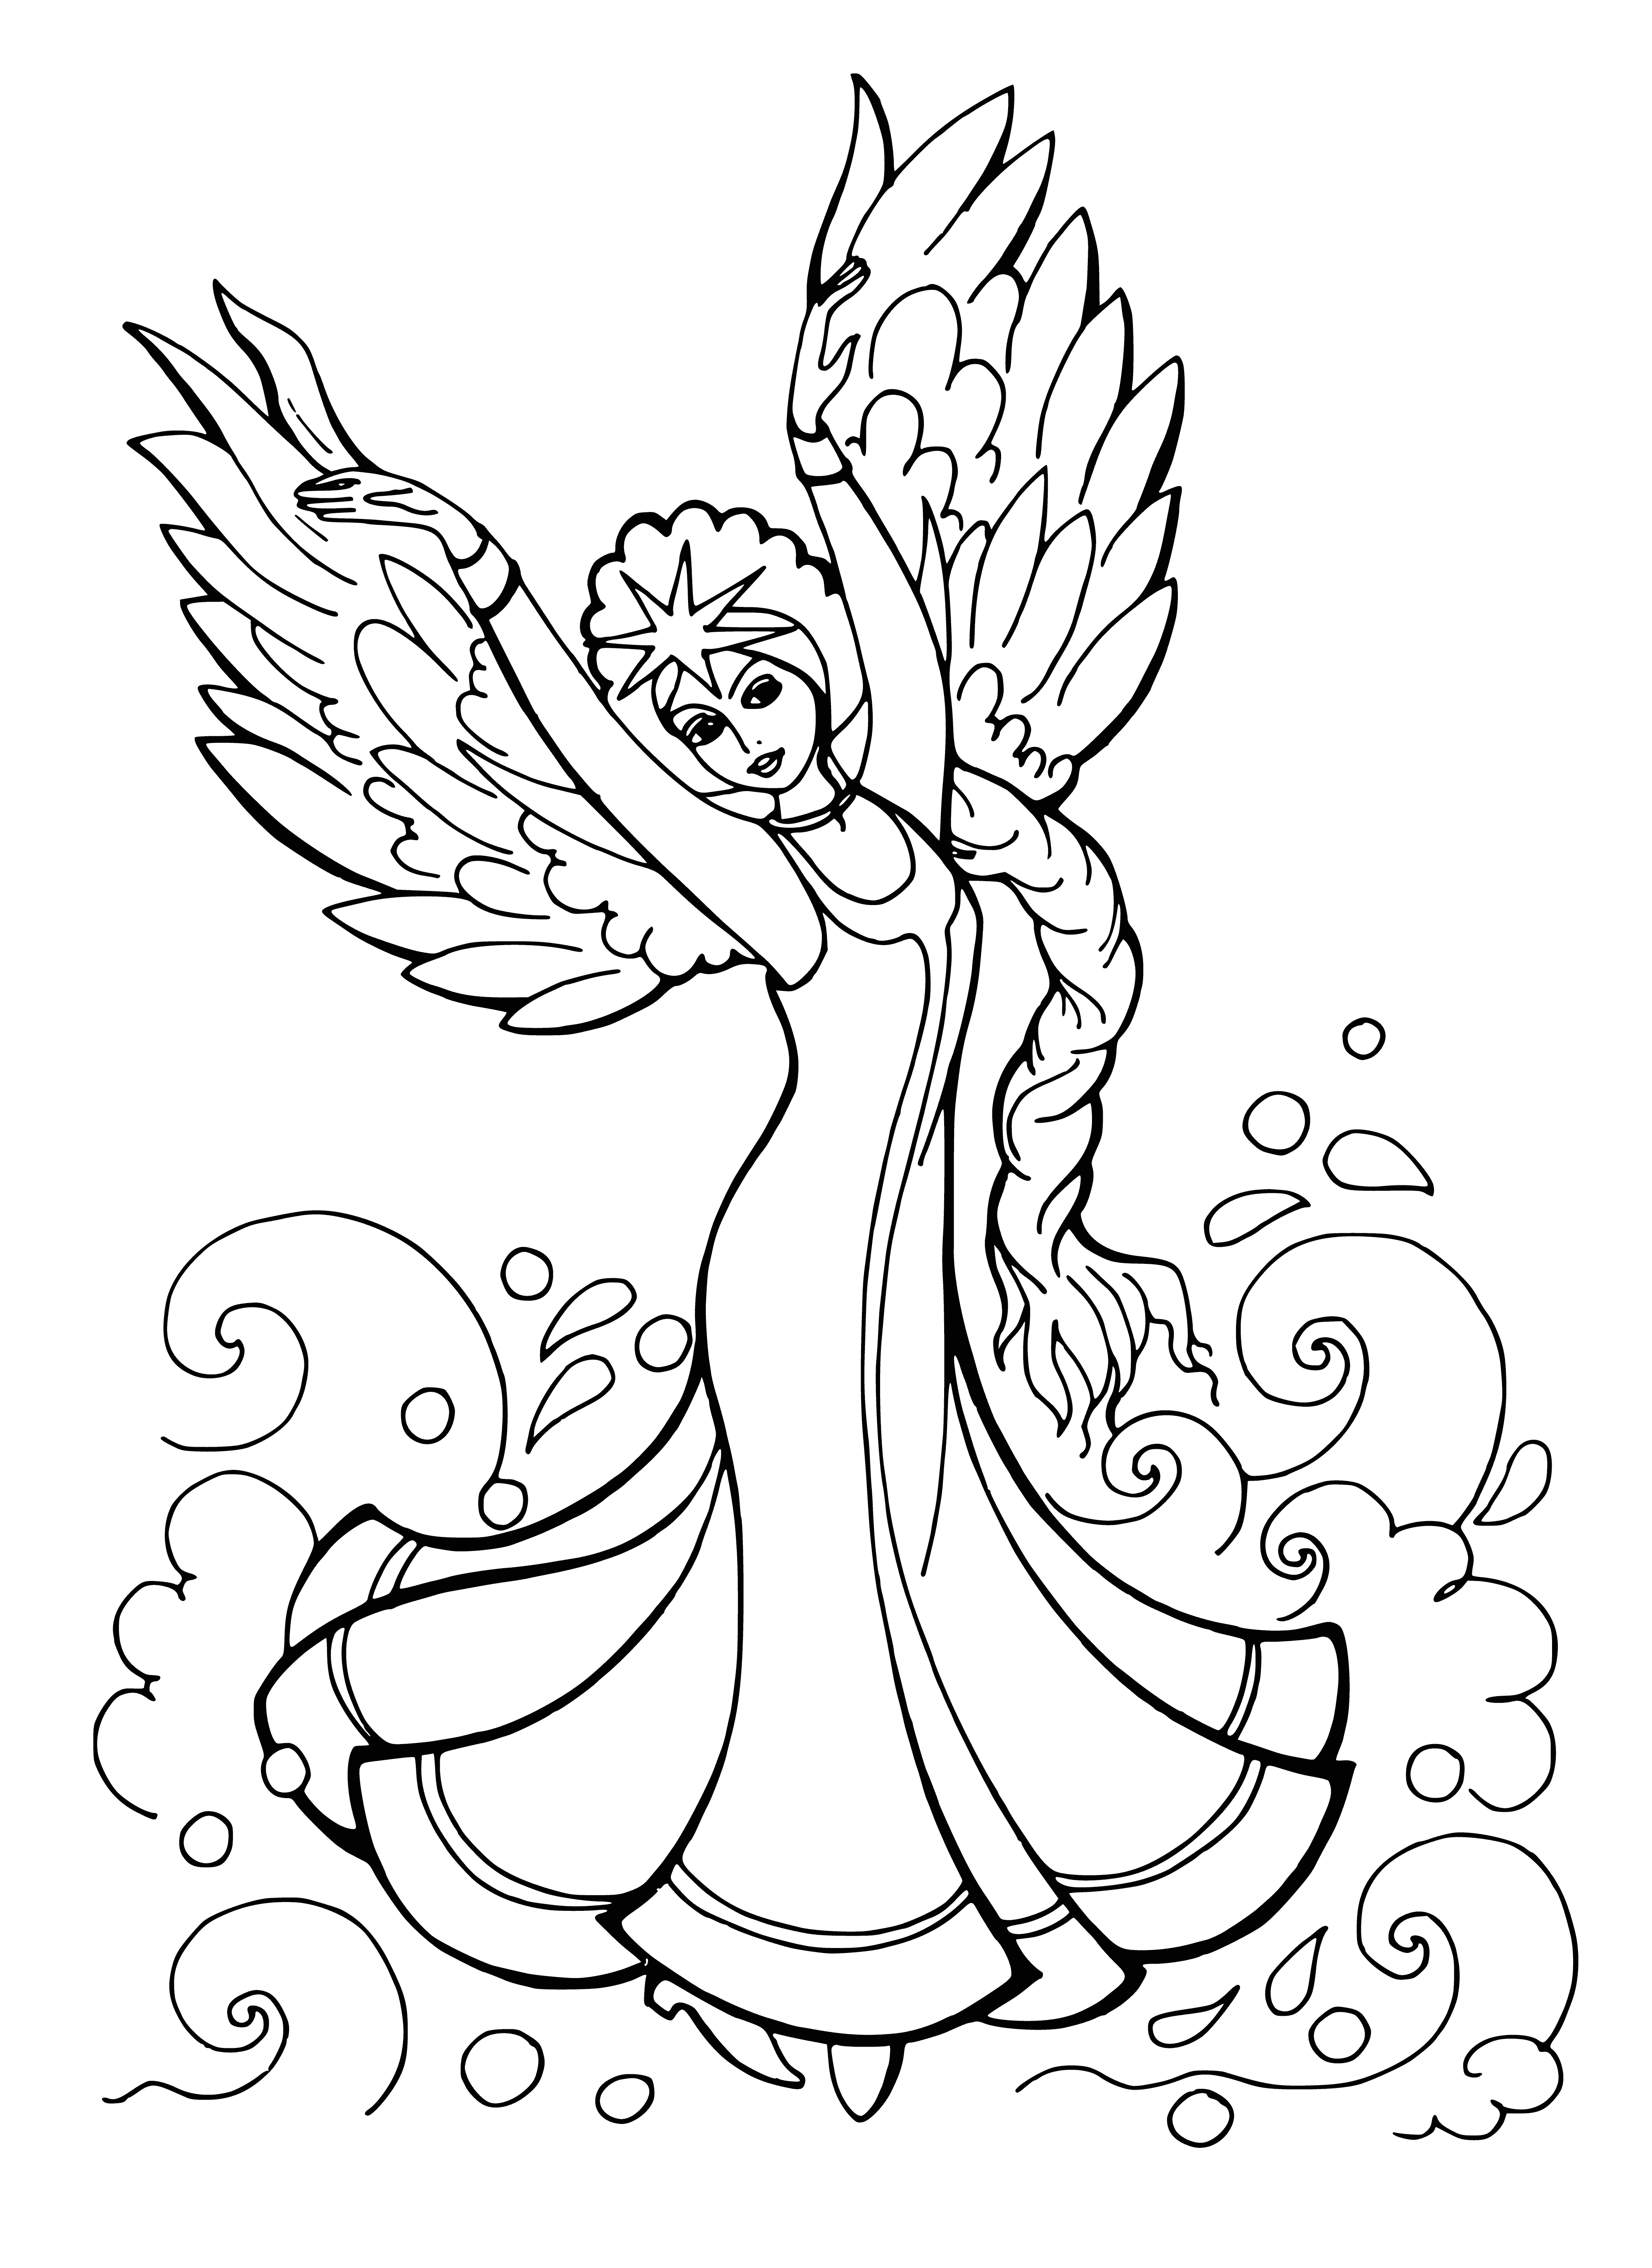 coloring page: Girl in white dress sits on lake rock with arms around knees, looking up. Backdrop of mountains and trees.